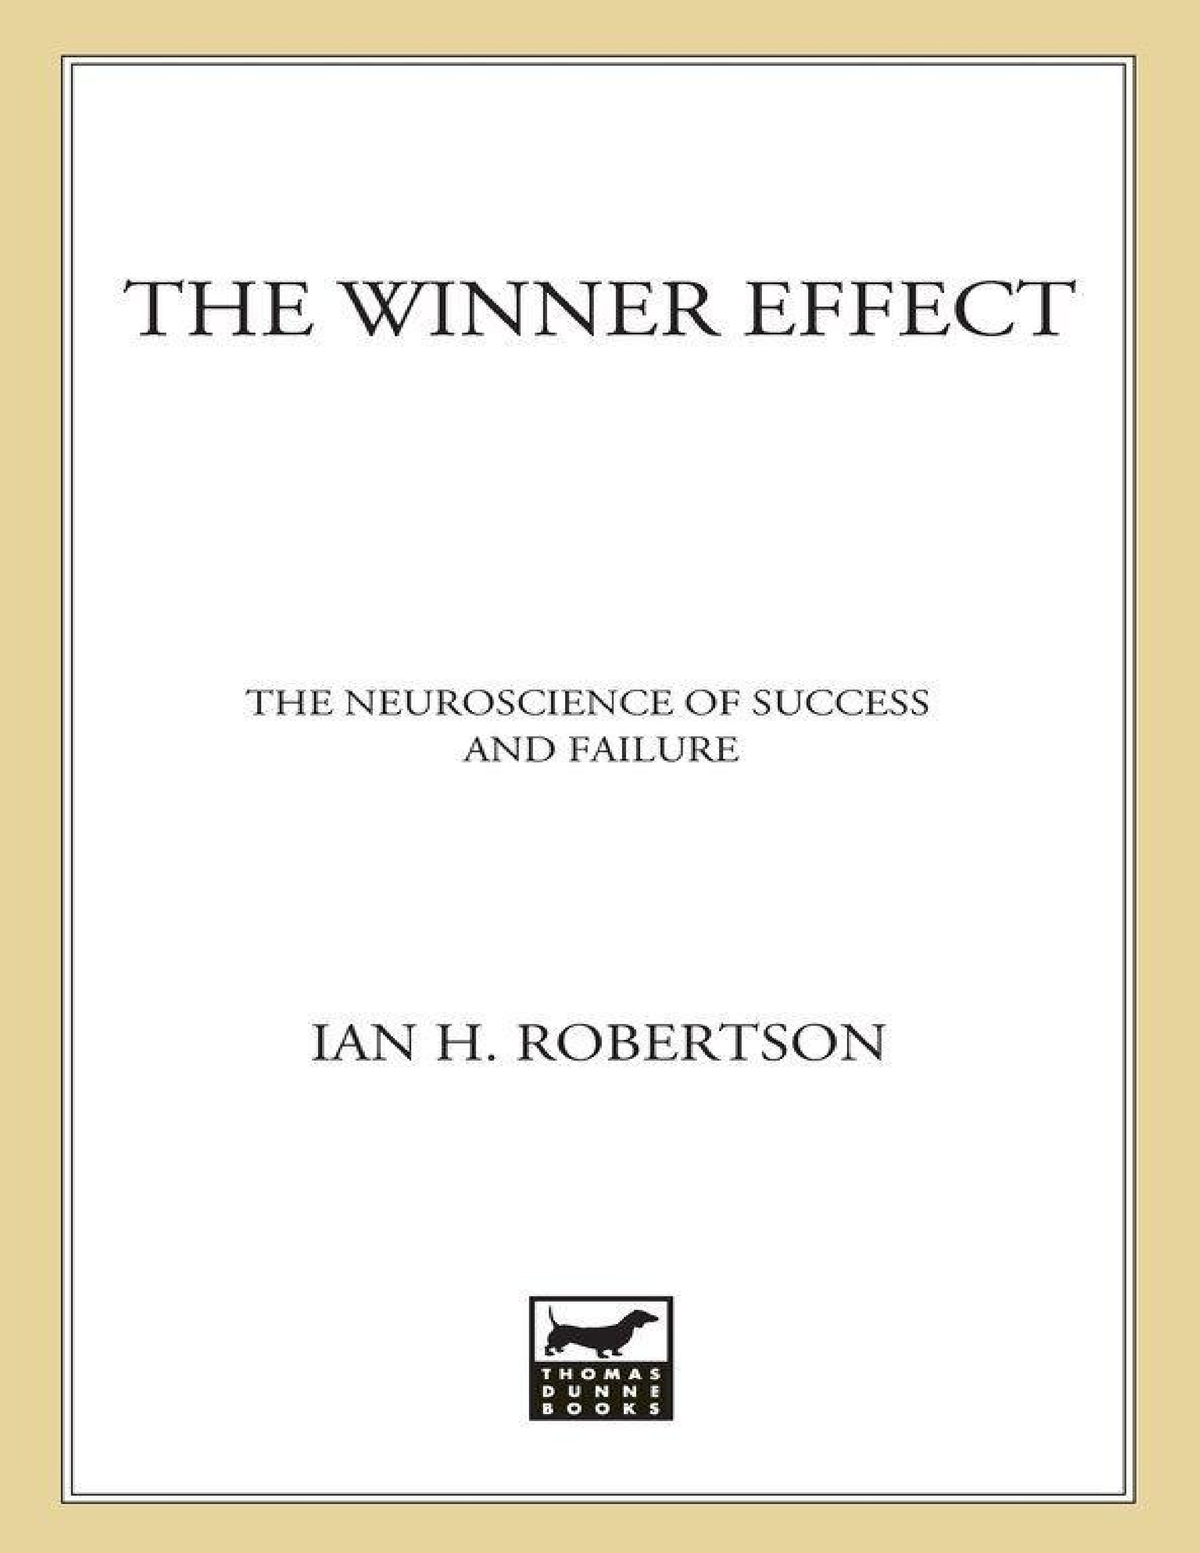 The Winner Effect: The Science of by Ian H. Robertson